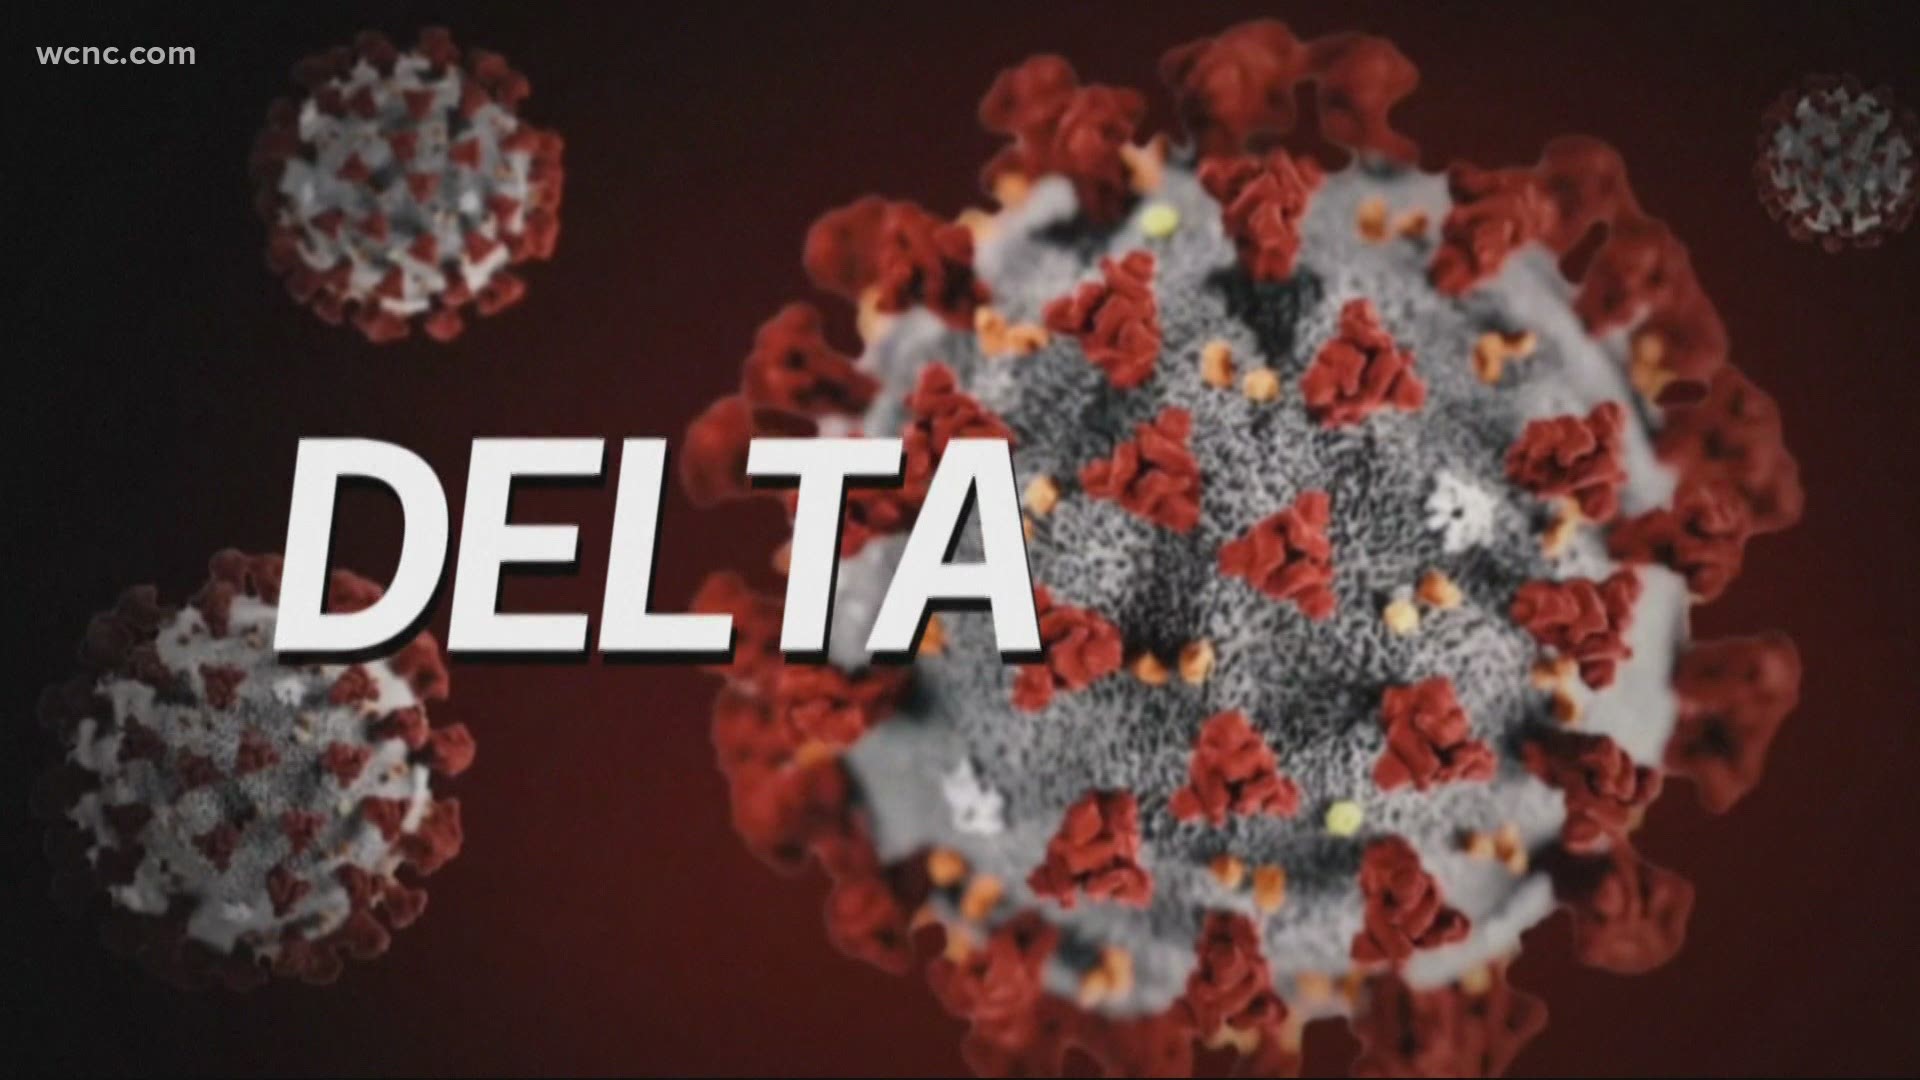 Is delta virus what How contagious